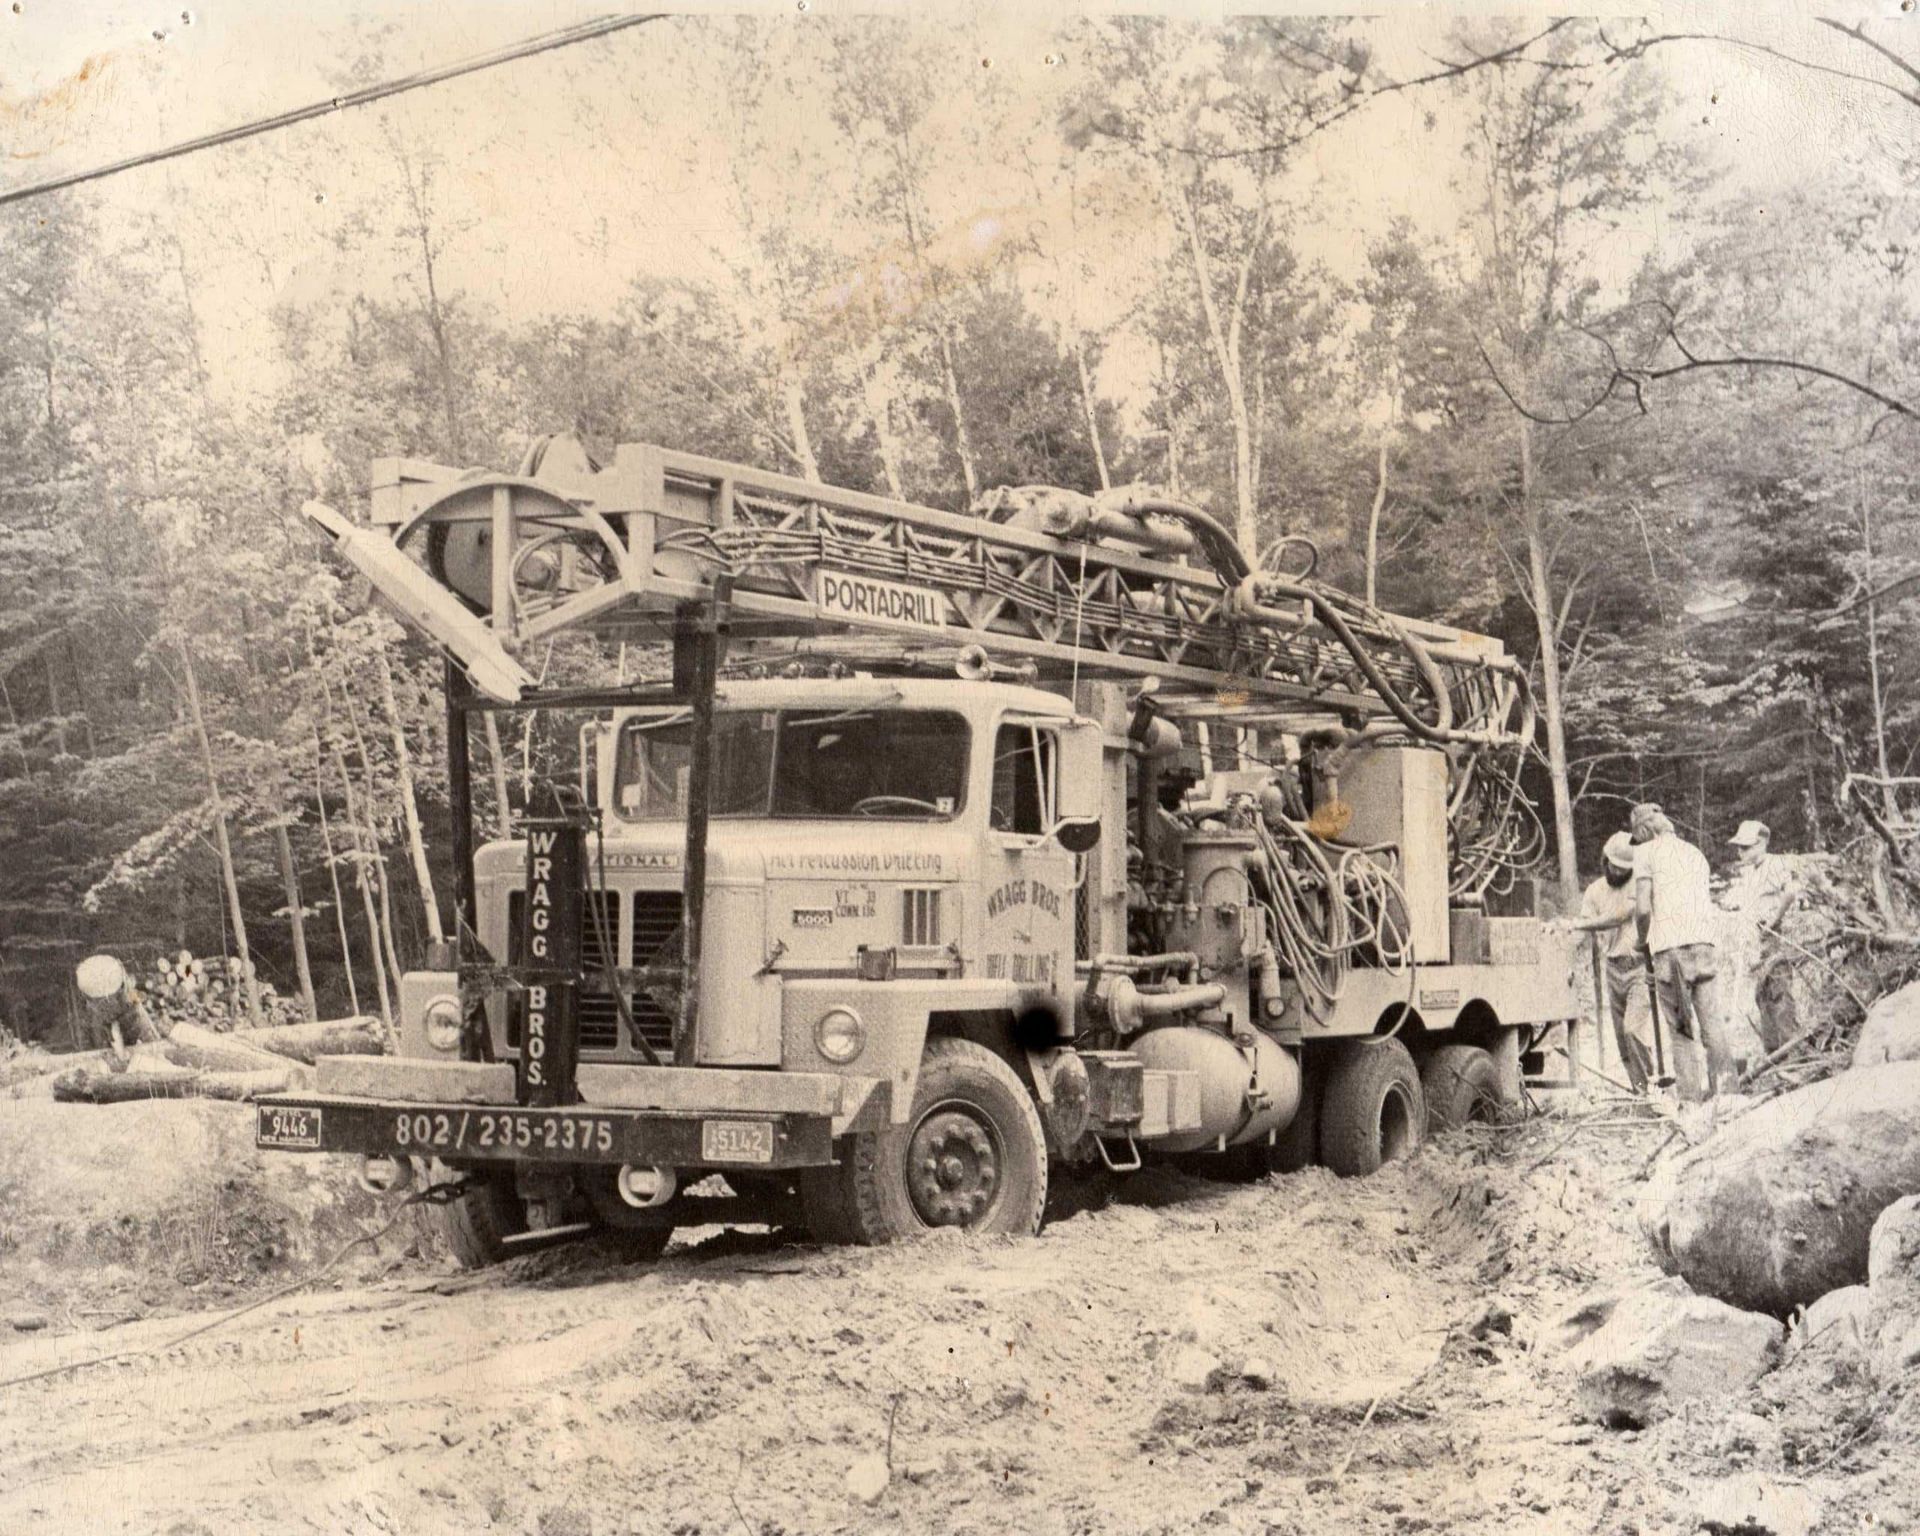 Wragg Brothers Water Well Drilling